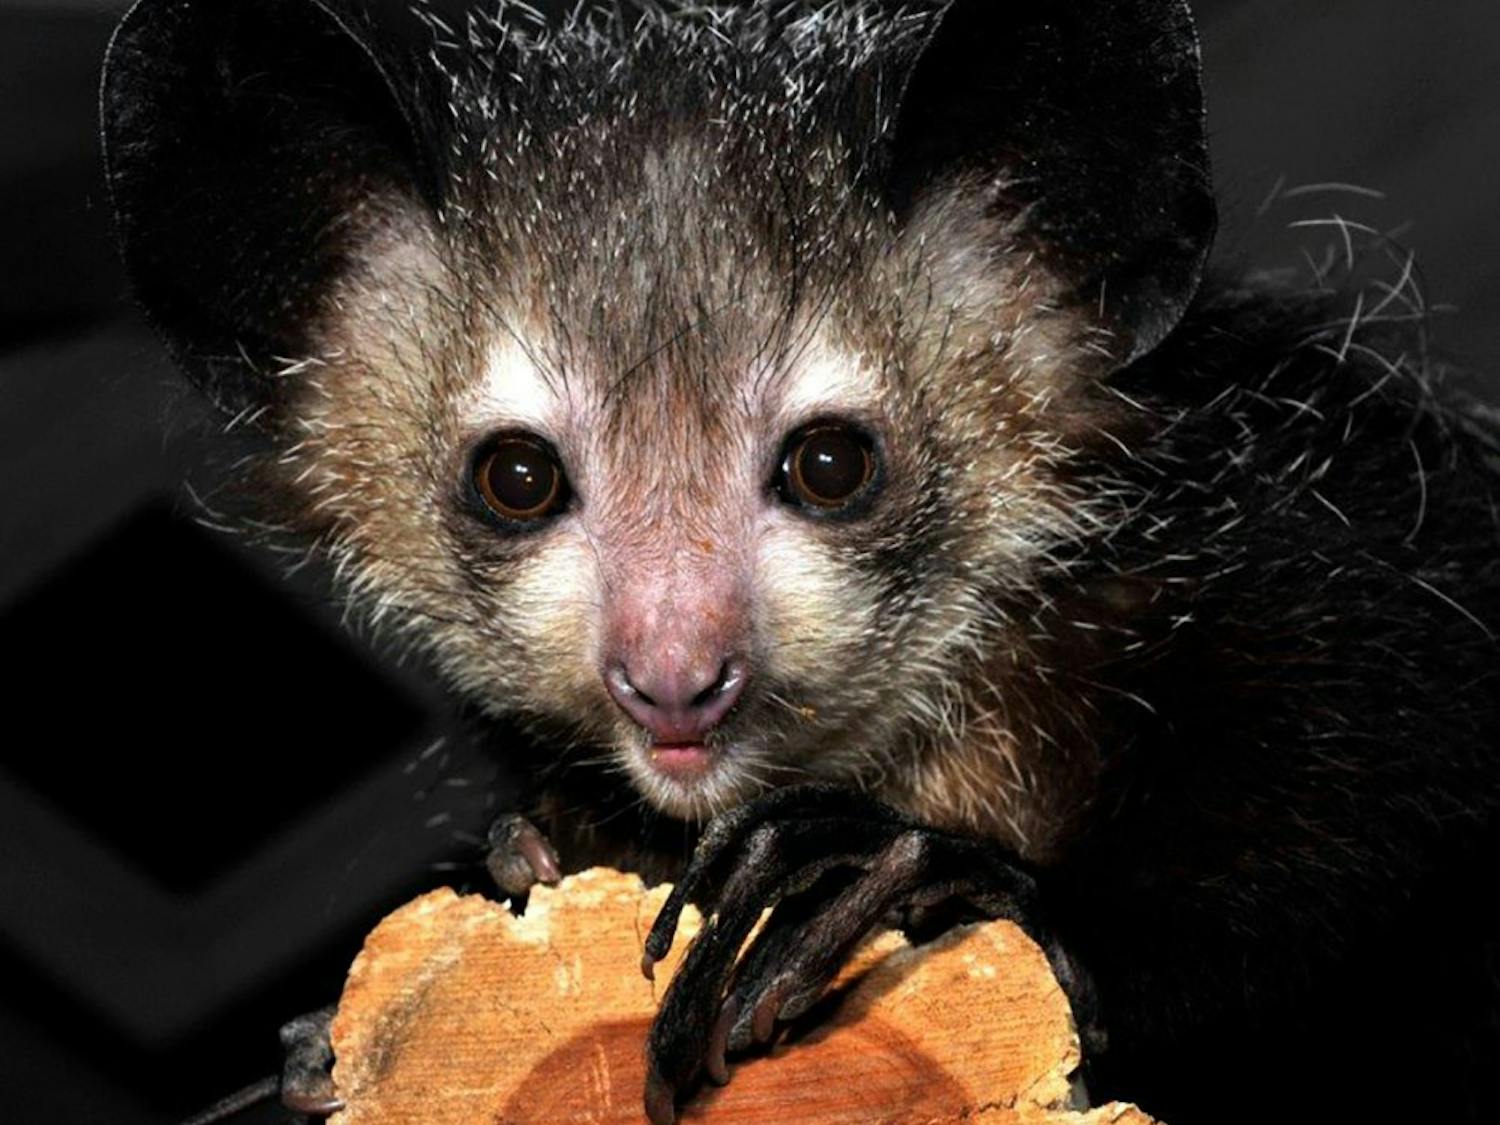 Four aye-aye lemurs died last October because of toxins in avocados that they were fed.&nbsp;